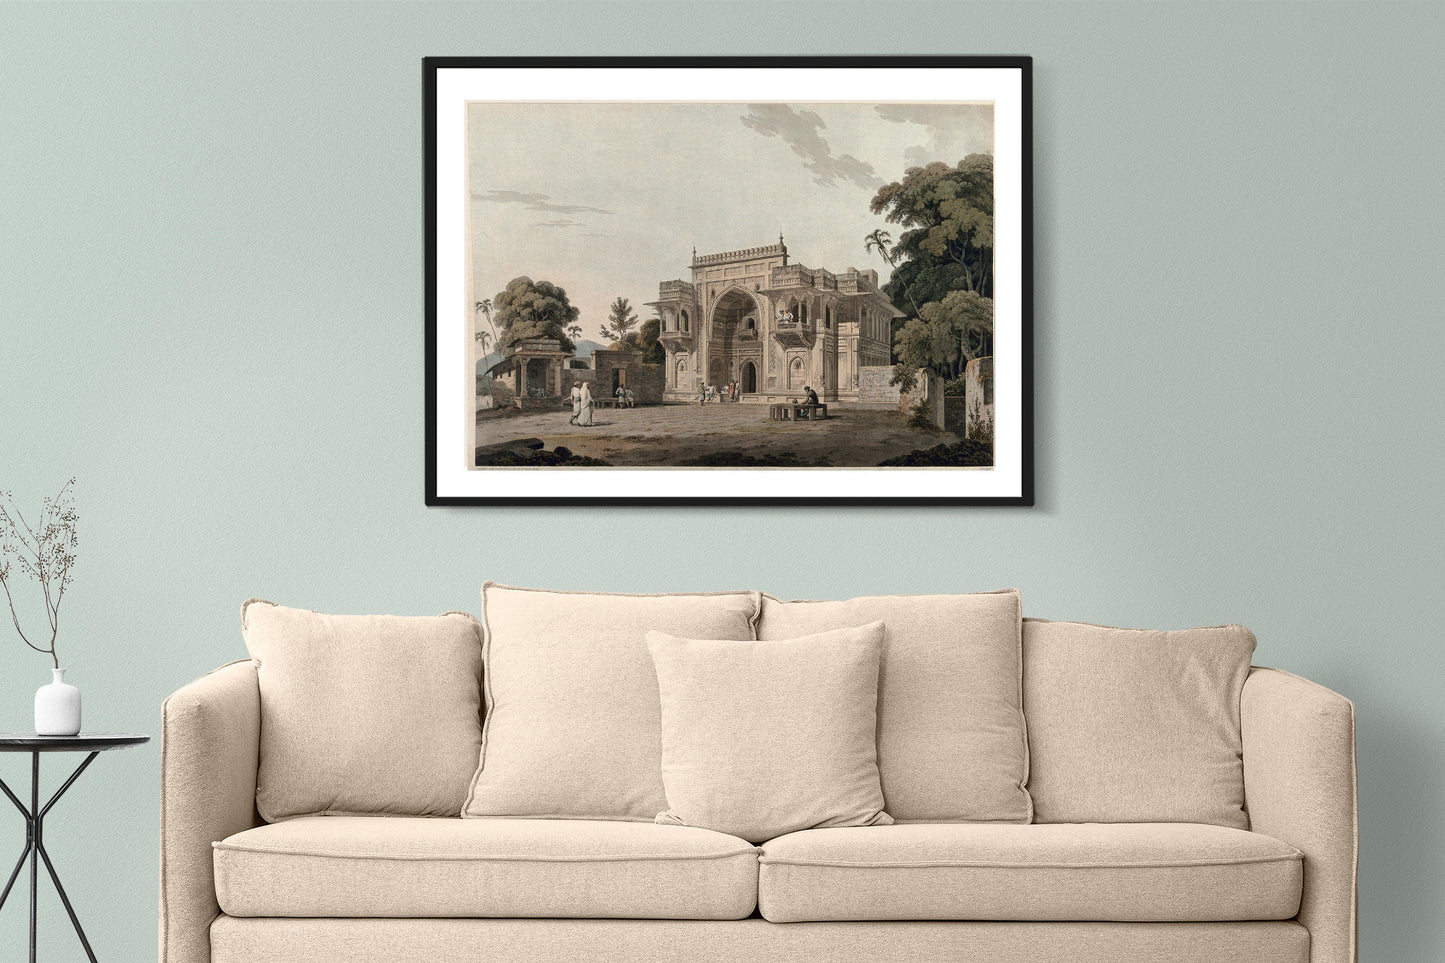 Oriental Scenery India Architecture Trees Landscape Vintage Art Poster Wall Hanging Decor